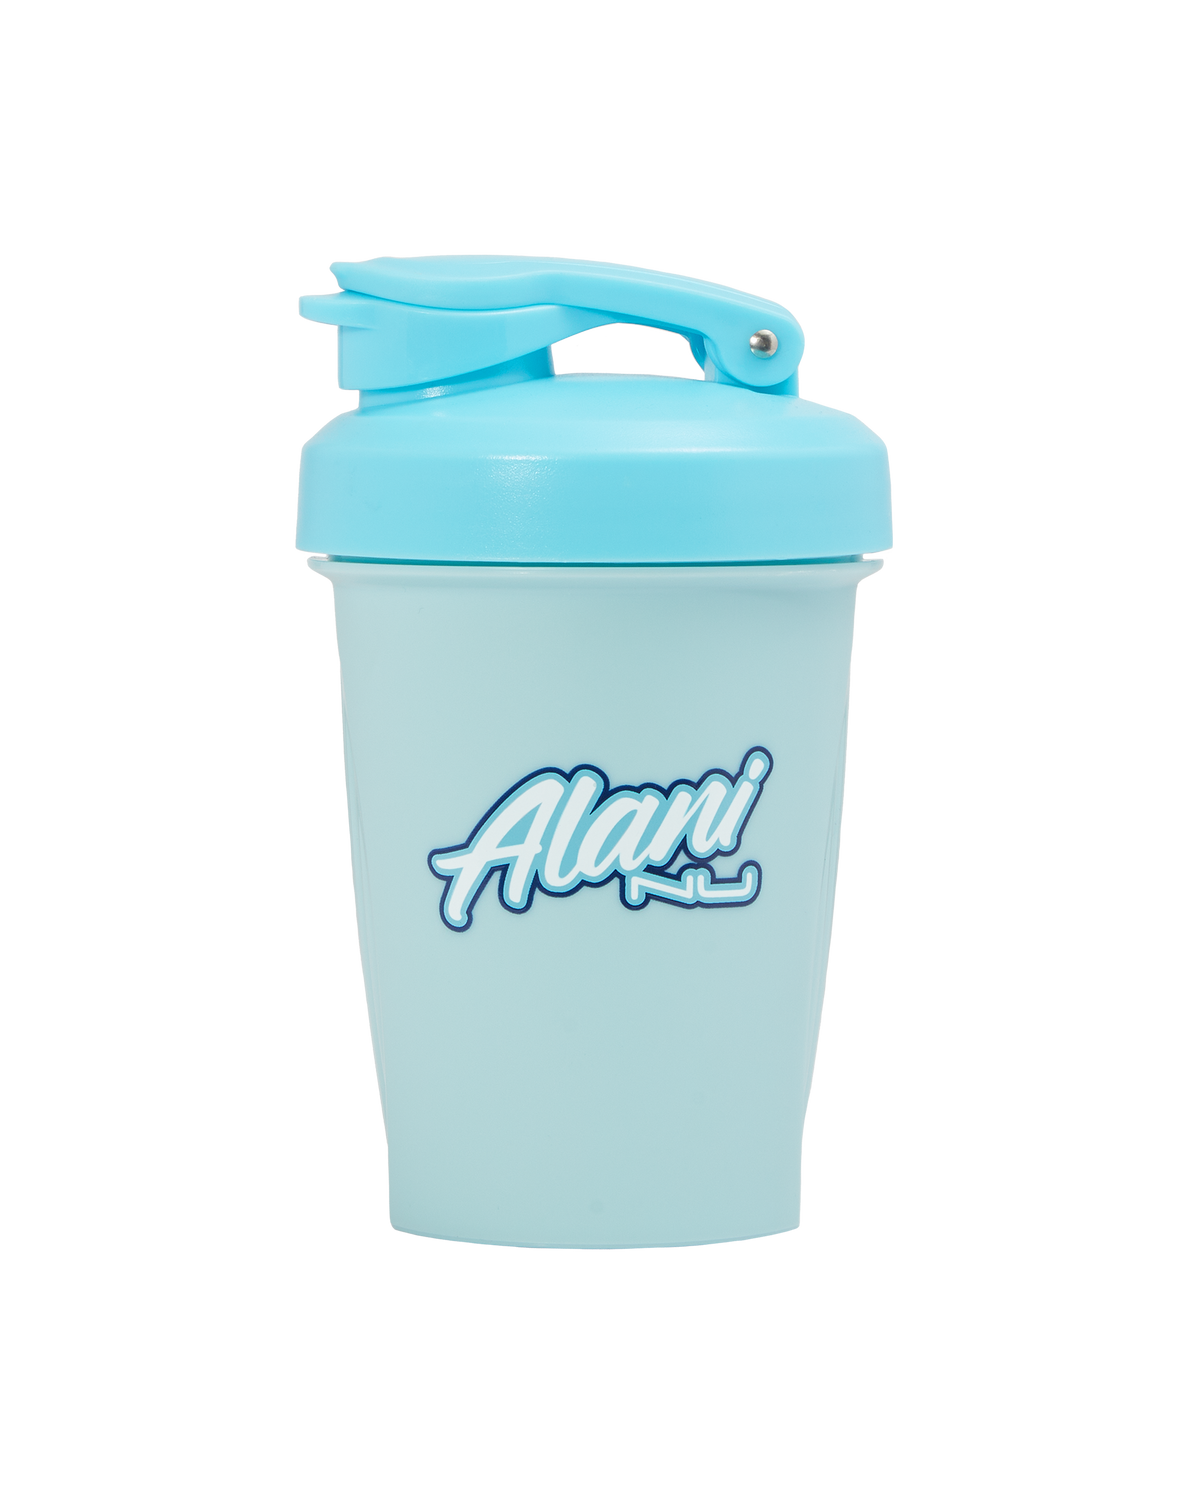 Protein Shaker Bottle,Wekity 12 oz Classic Leak Proof Double-layer  Milkshake Blender Cup with Mixer Ball and Silicone Storage Container,  Detachable and foldable, for people who like fitness (Blue) 